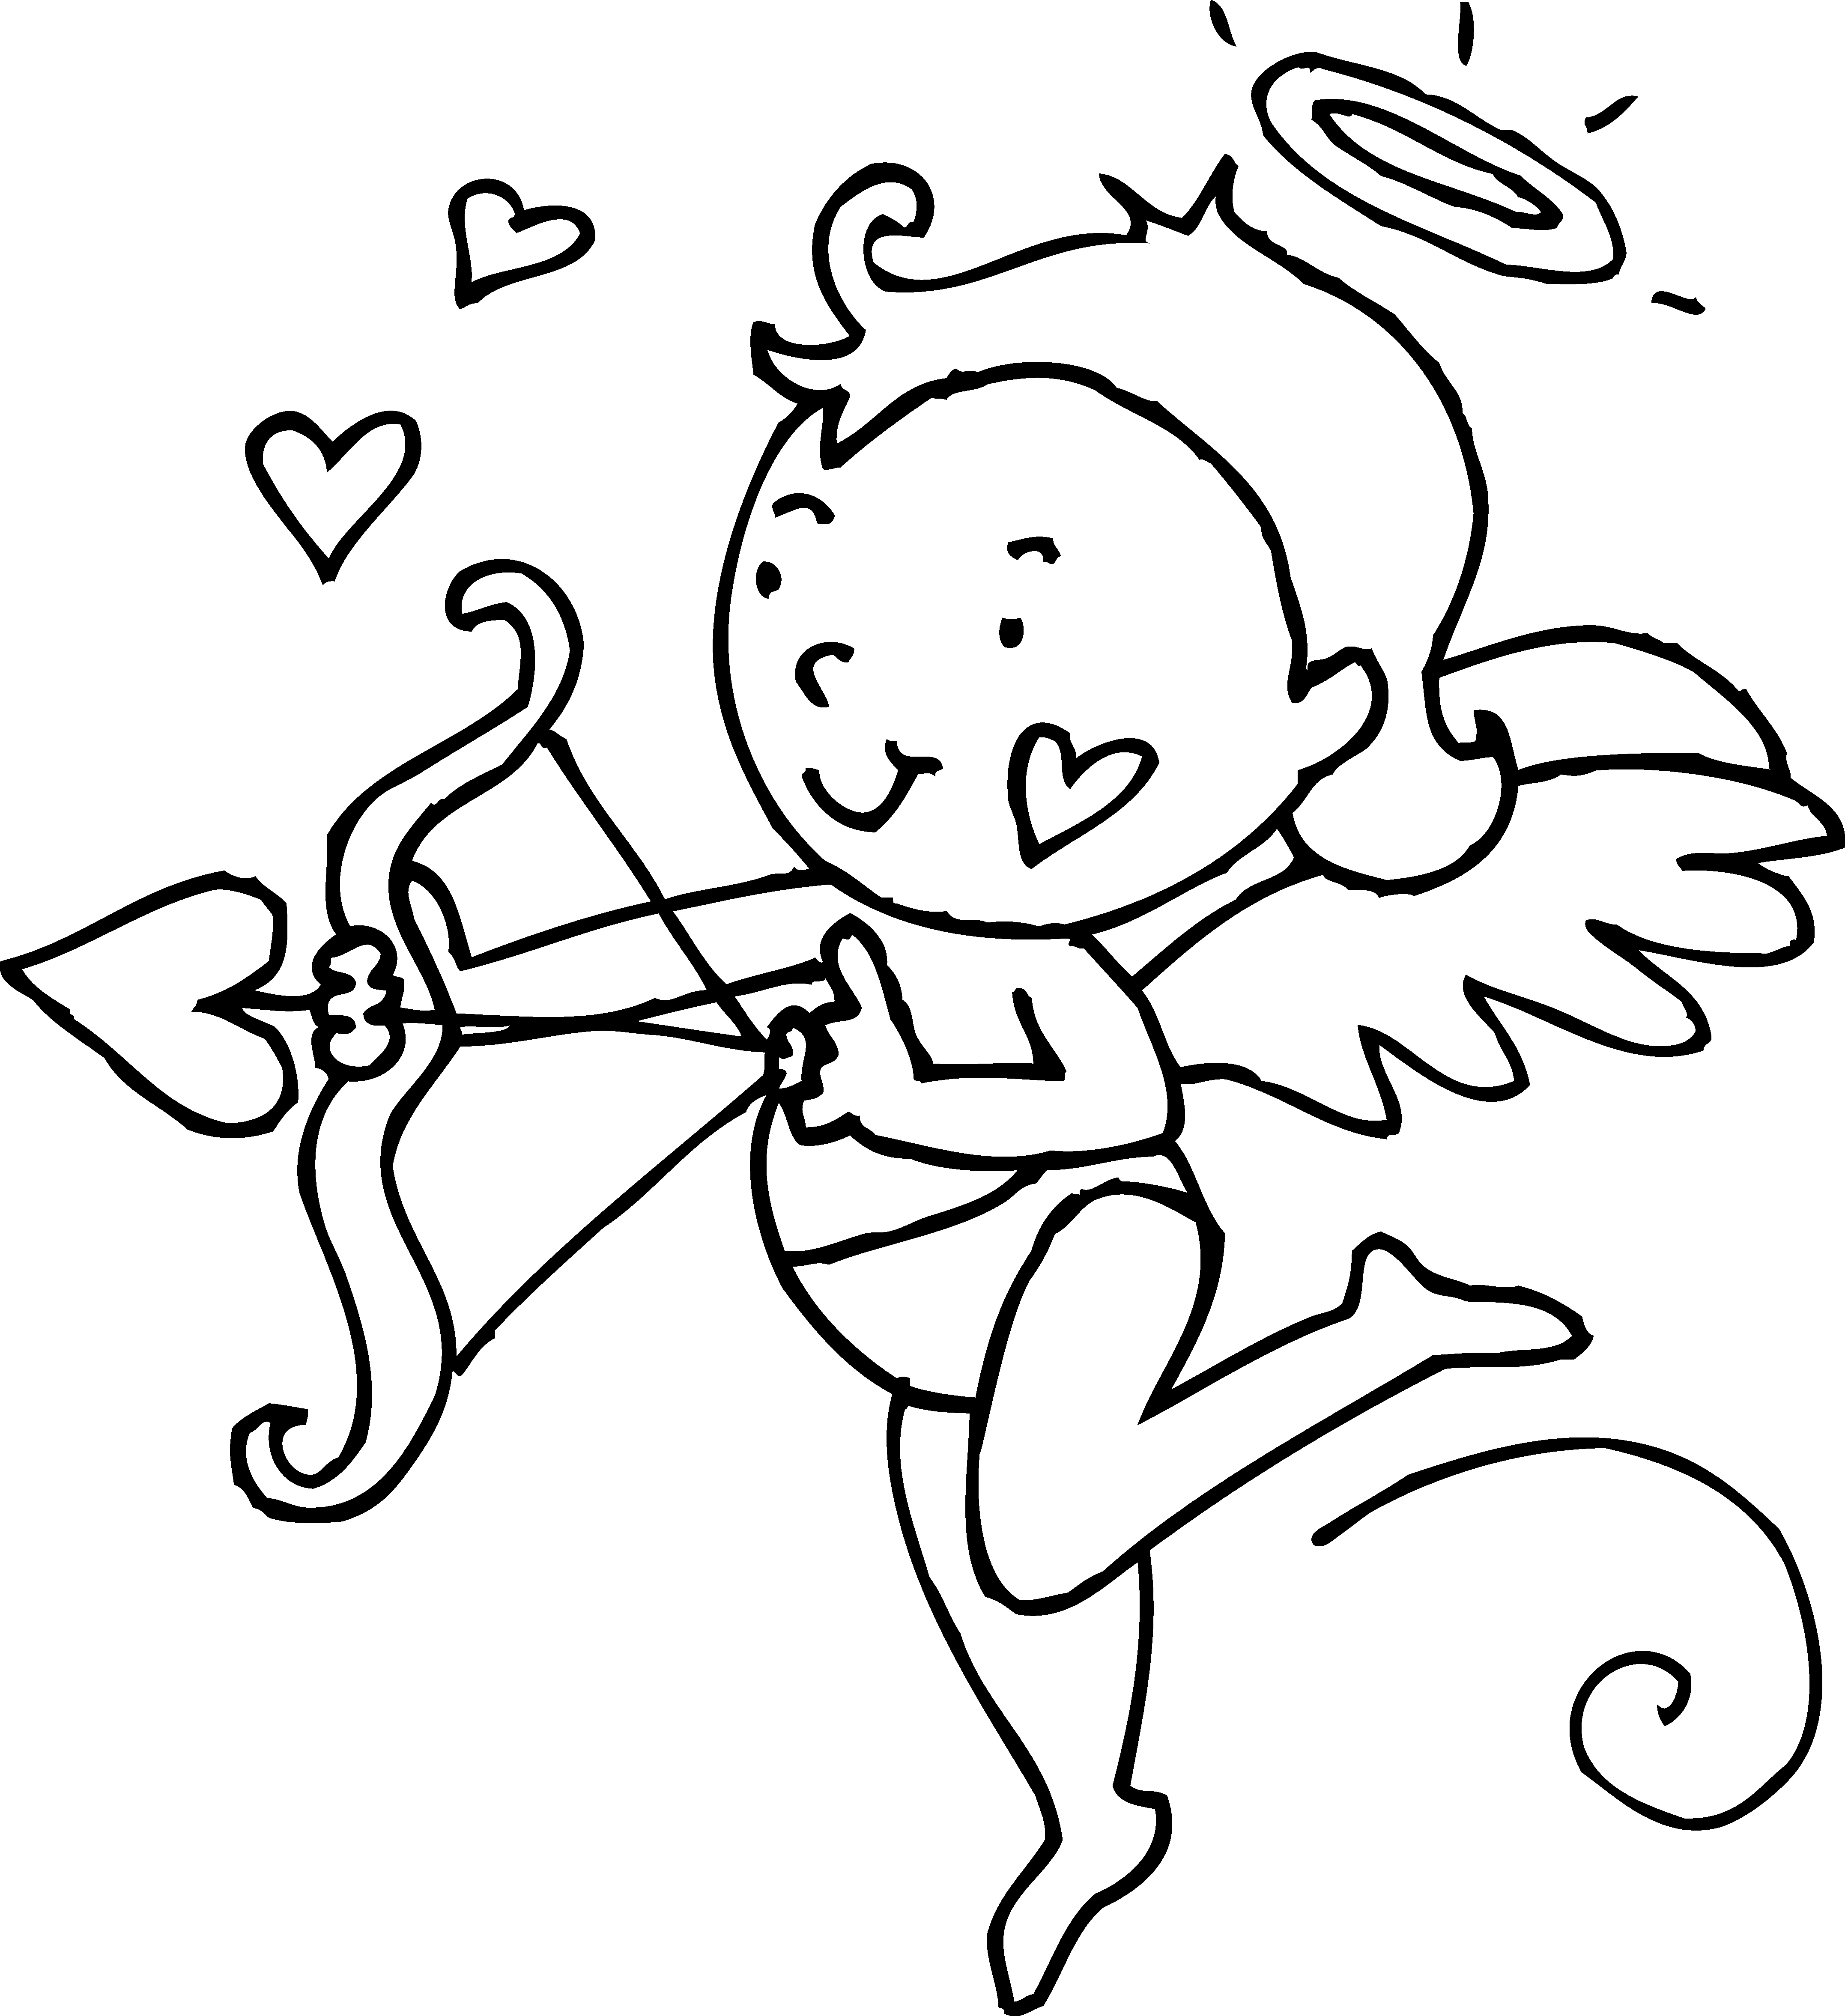 Clipart penquin valentines. Cute cupid coloring page